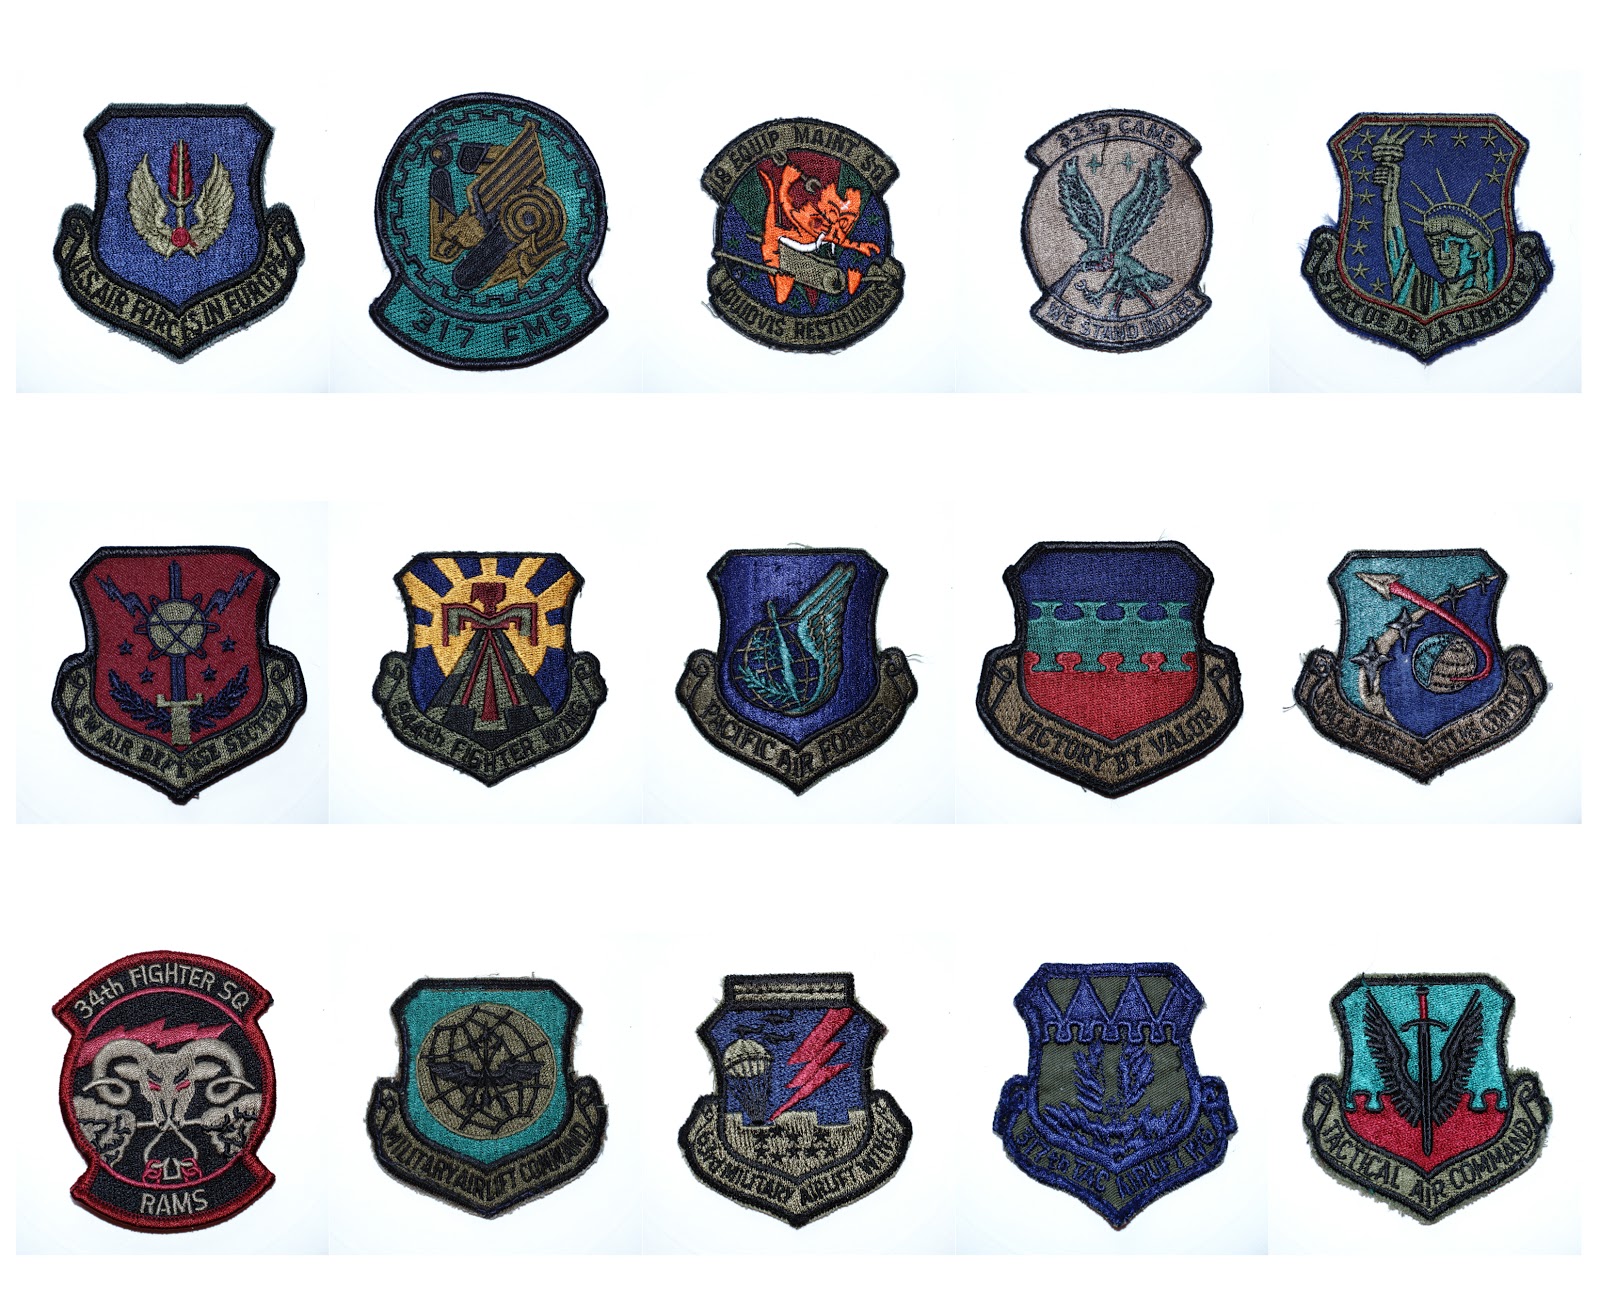 spring-2014-docu-photo-air-force-patches-typology